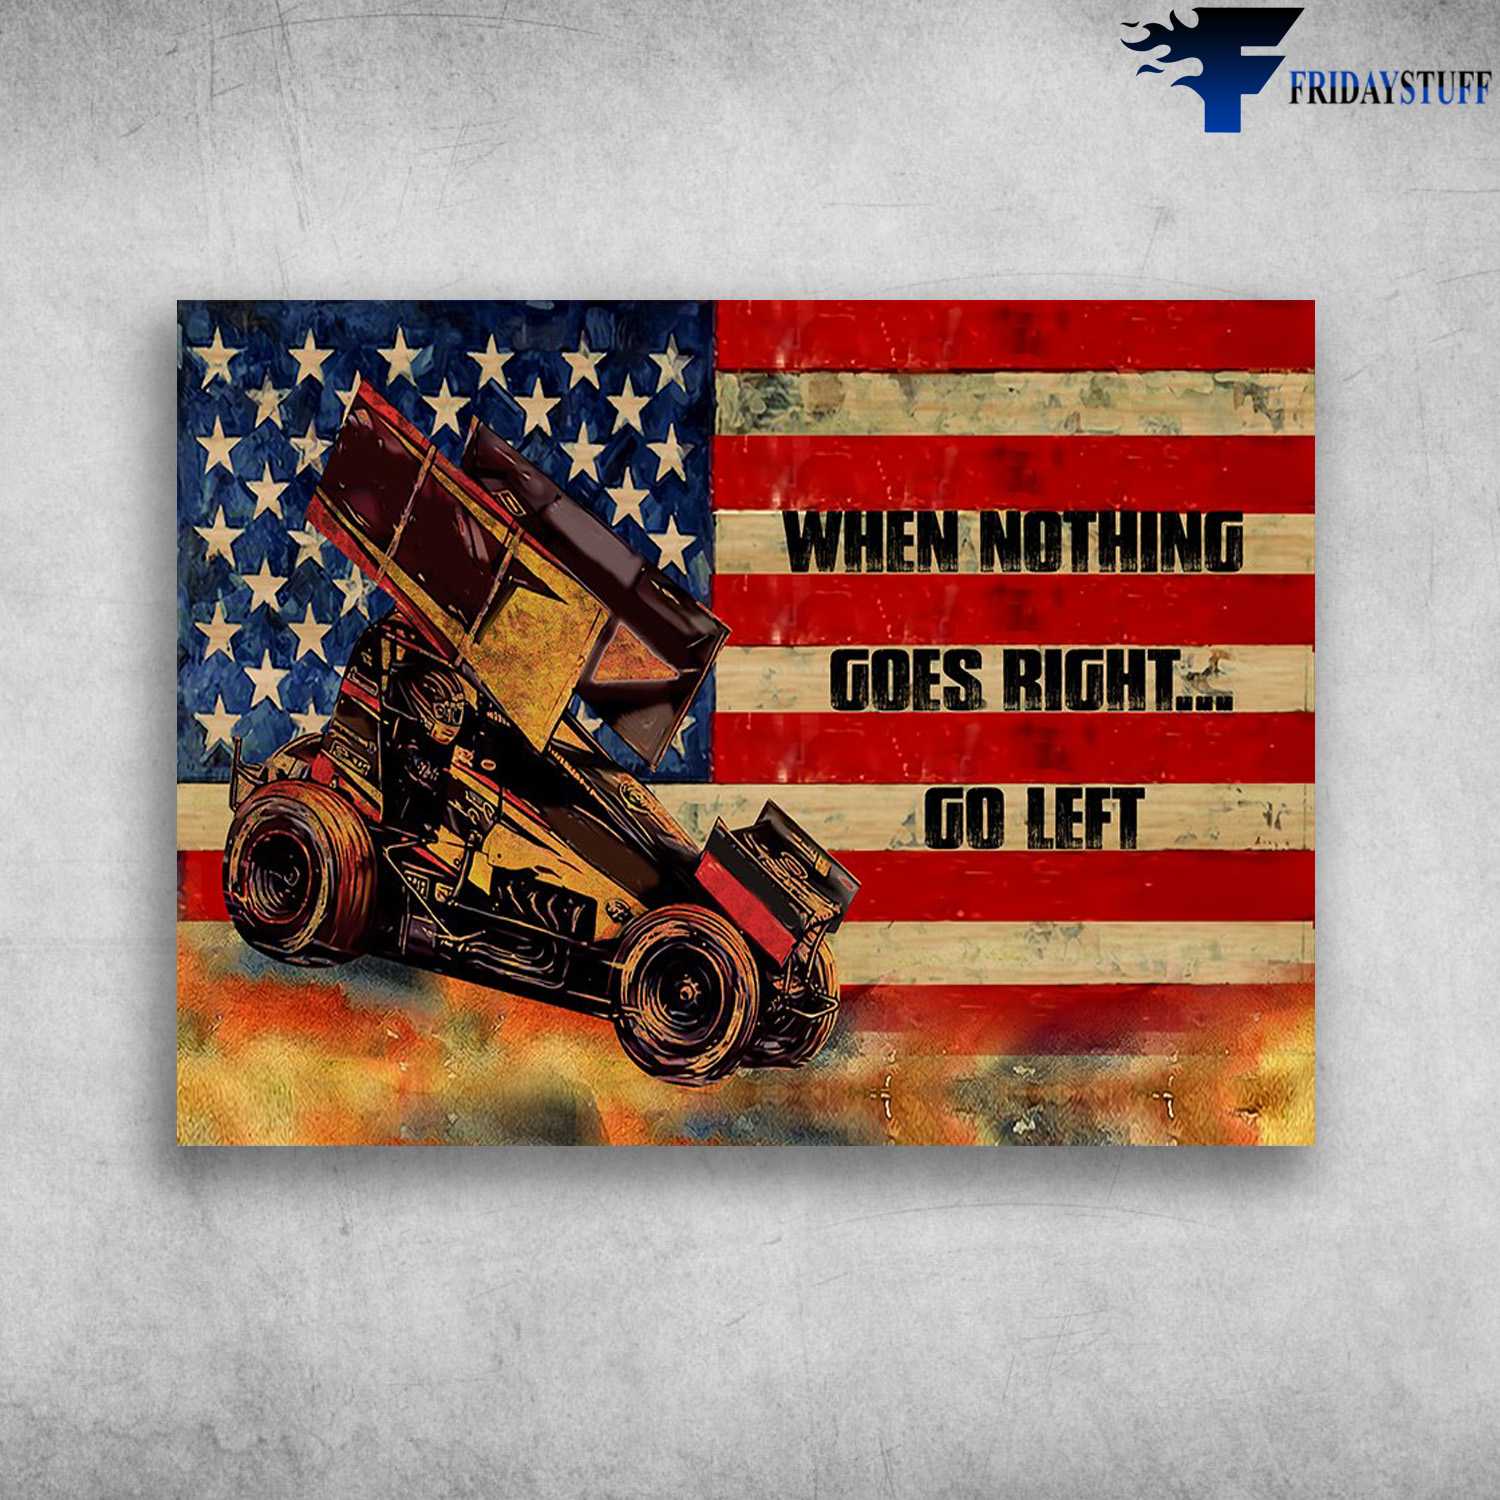 Dirt Car, America Flag - When Nothing Goes Right, Go Left